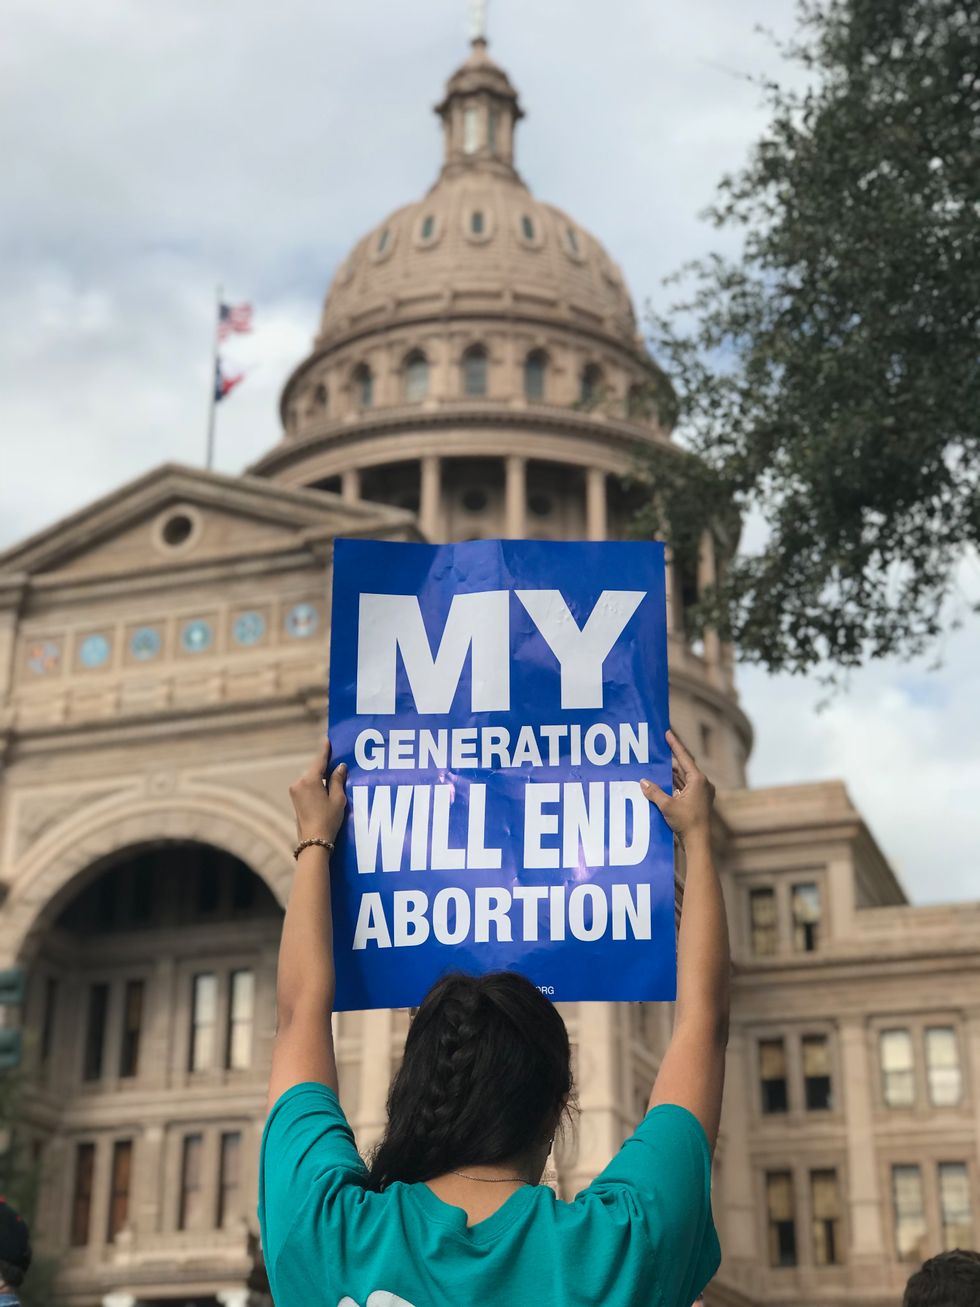 20-Week Abortion Ban Fails While The Genocide Continues